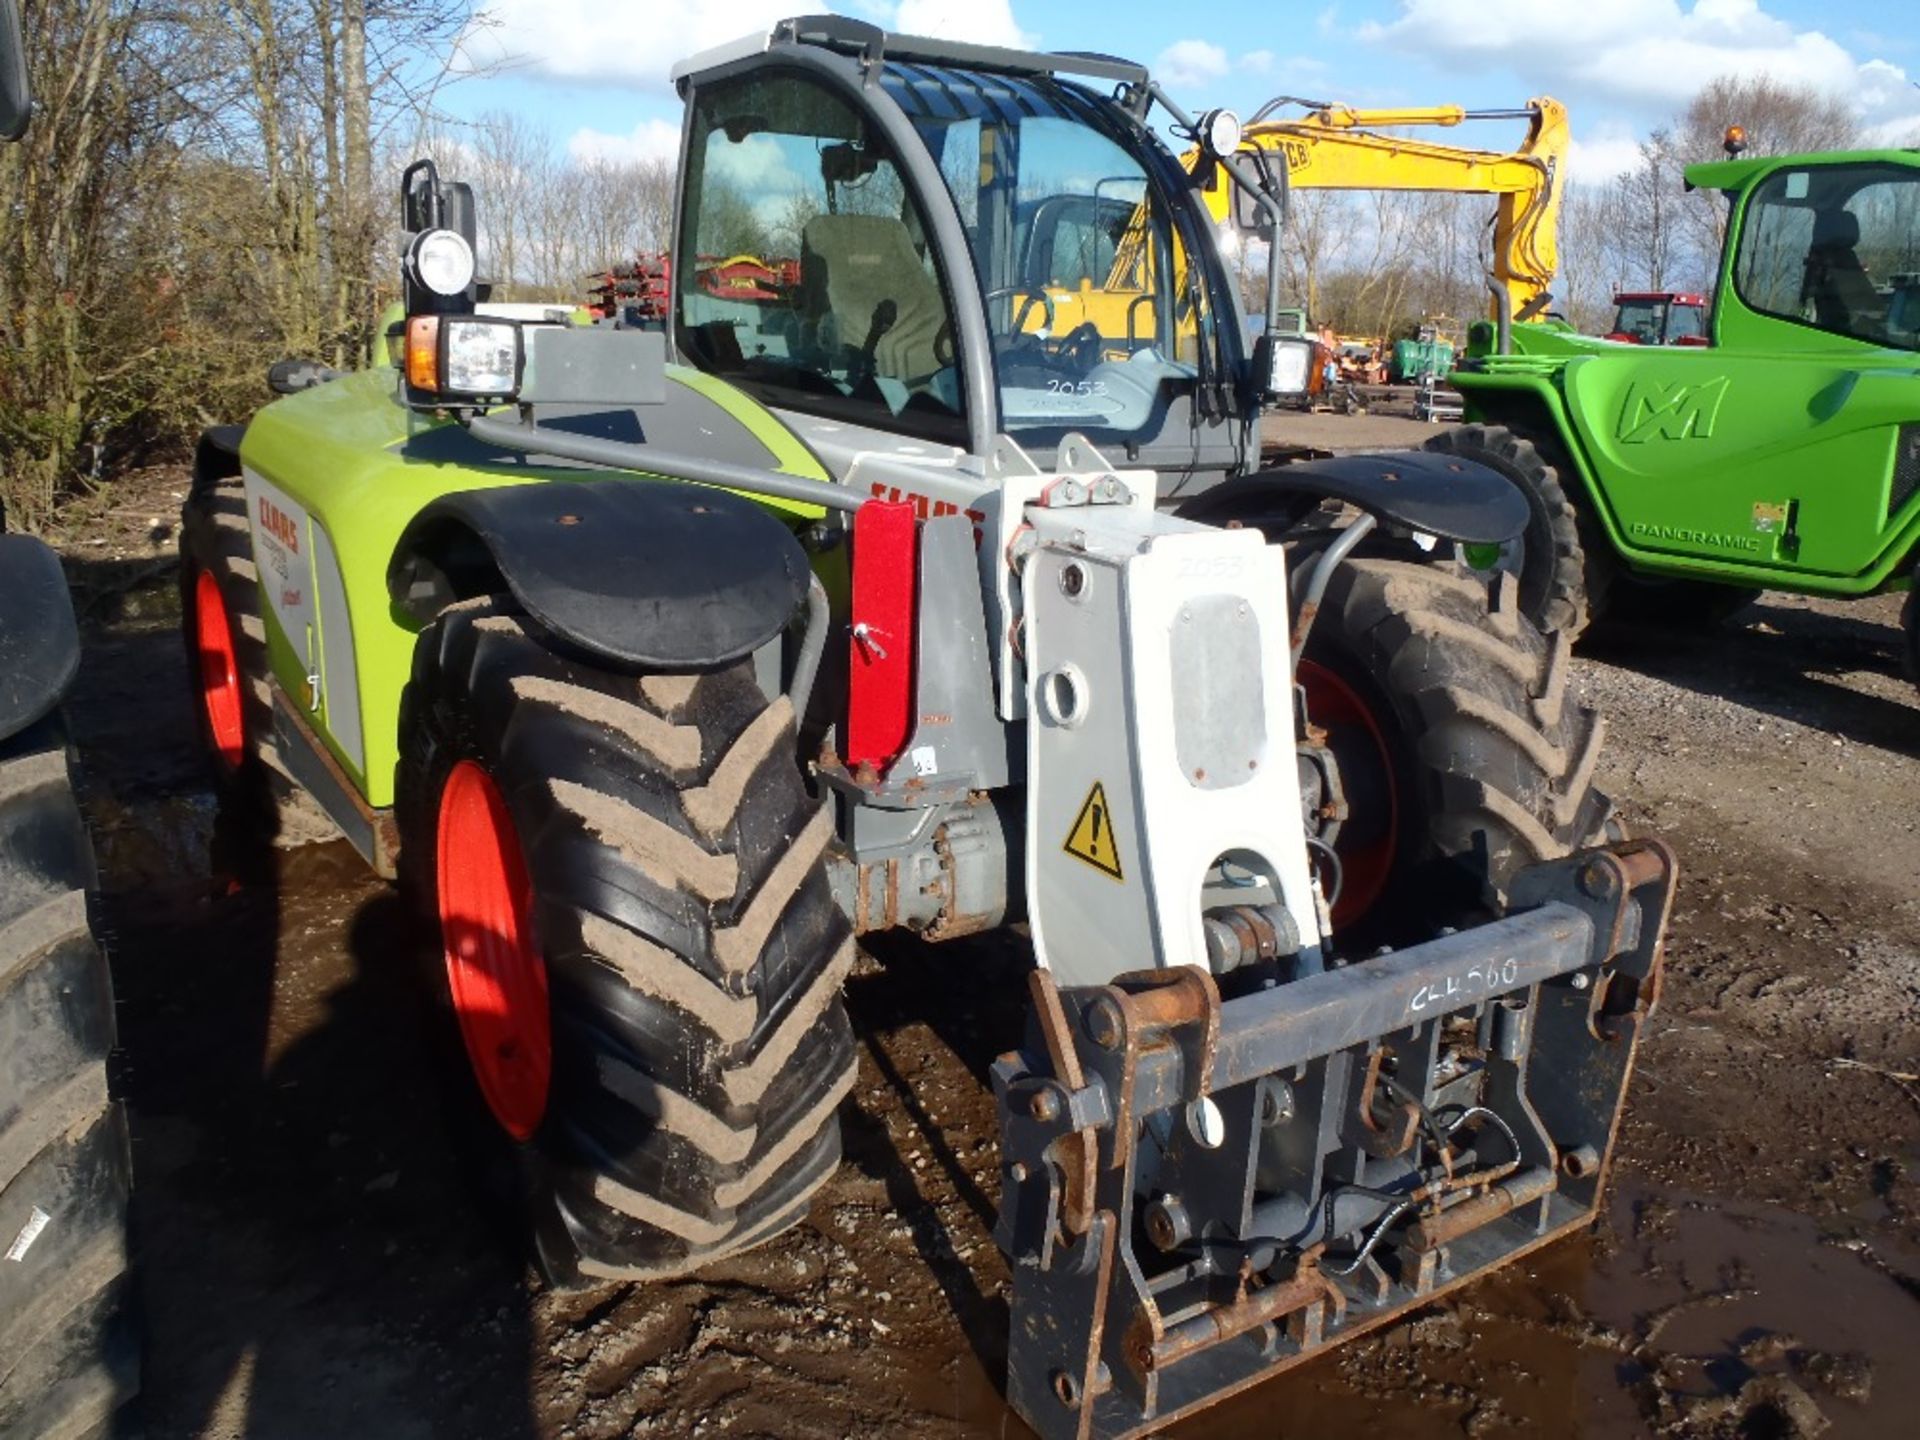 2009 Claas Scorpion 7030 3.5 Ton 7m Telehandler with Pick Up Hitch, Boom Suspension, JCB Headstock - Image 2 of 6